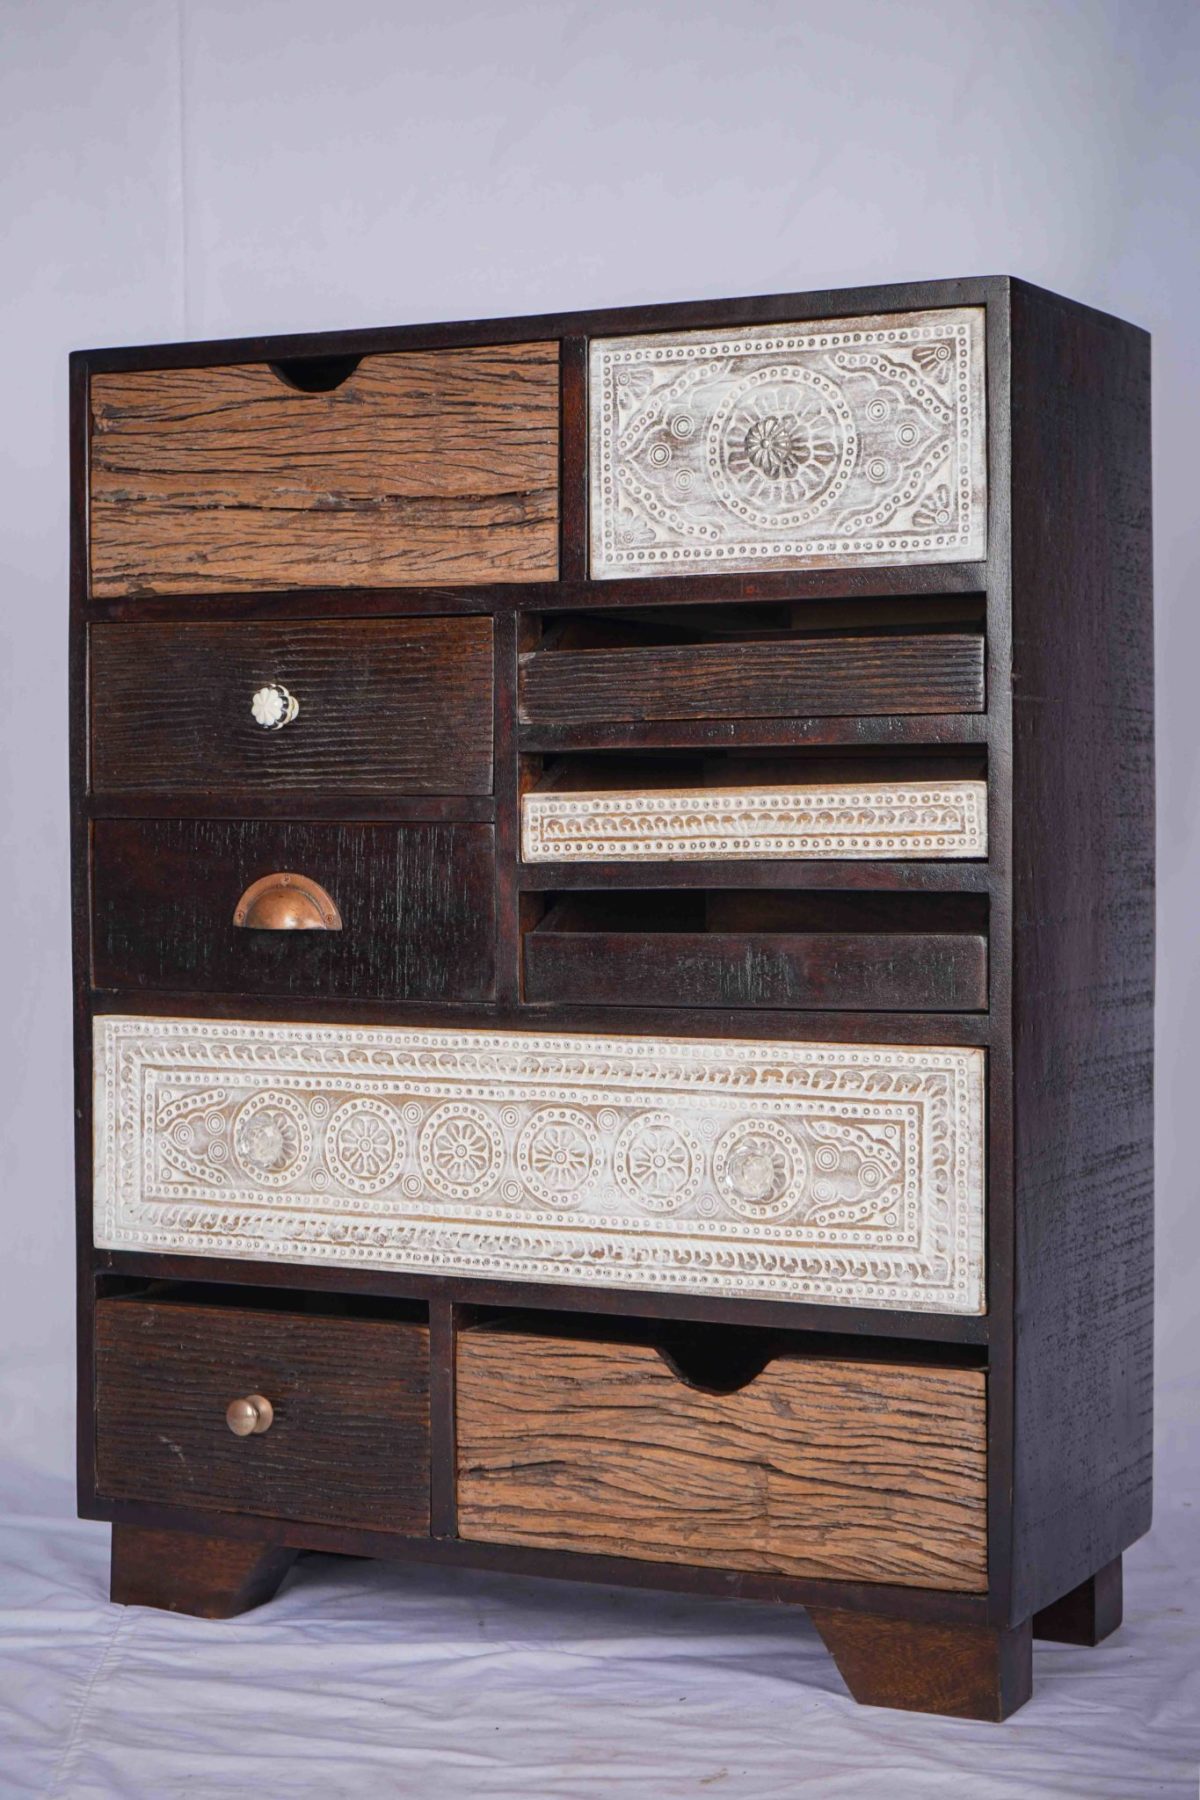 Detailed Carved Furniture Handmade Classic Indian Cabinet